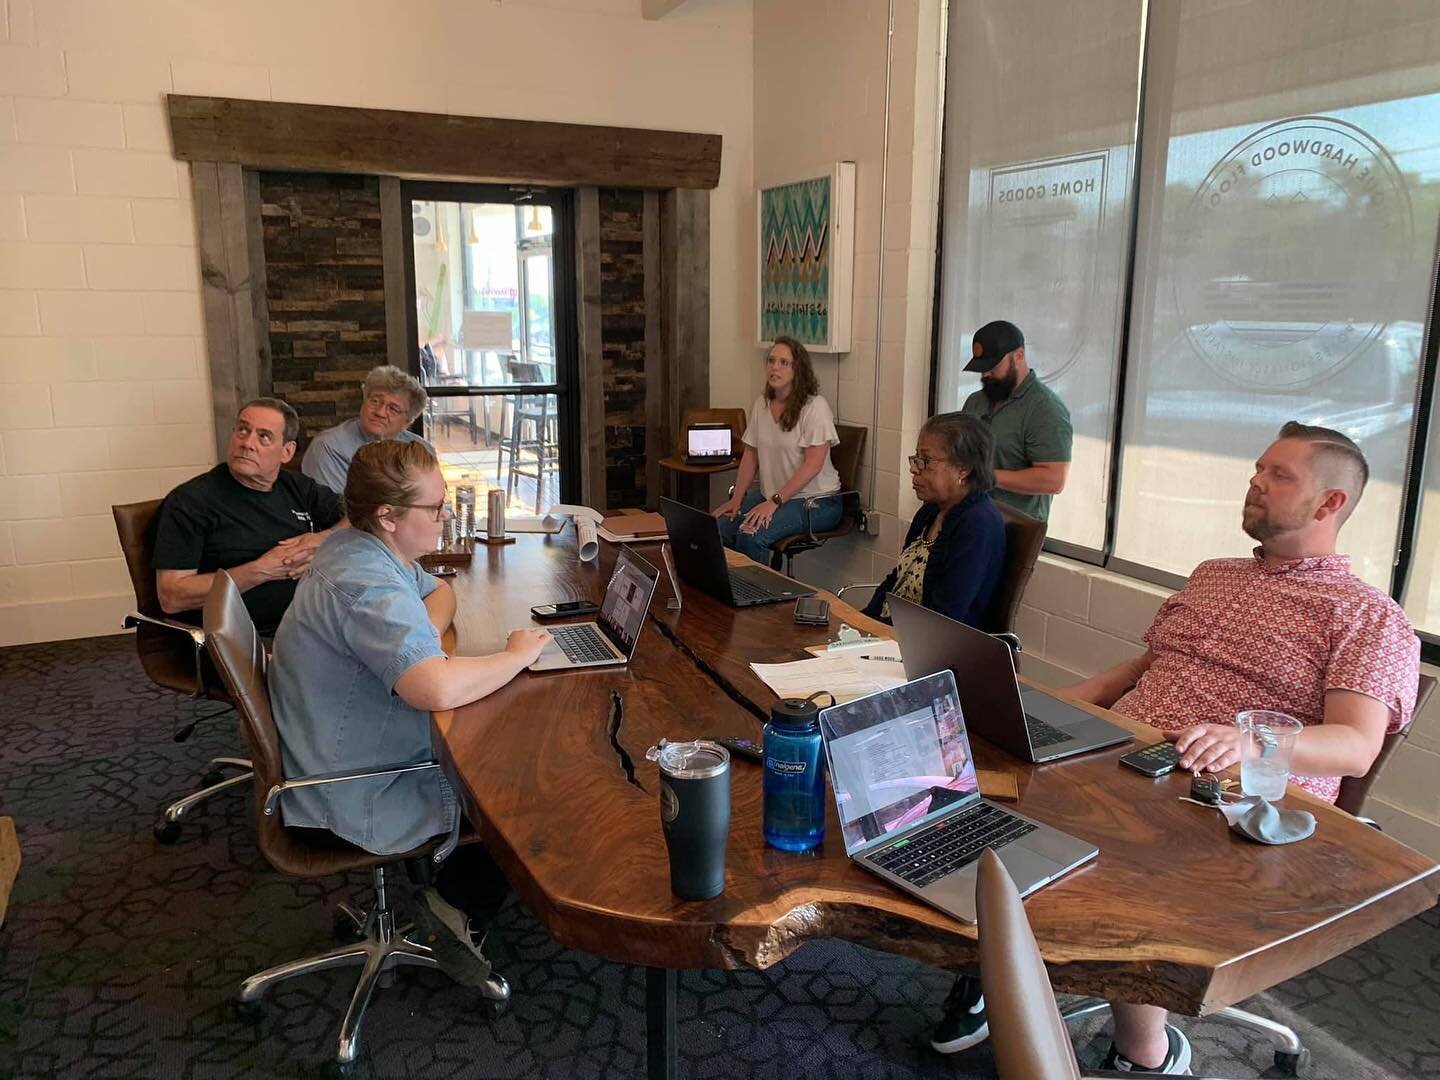 It was great to see DRMA members in person again at our first hybrid DRMA meeting! 

If you are a business or nonprofit between Ellington &amp; I-65 up to Skyline, please join us! Learn more at drmanashville.org